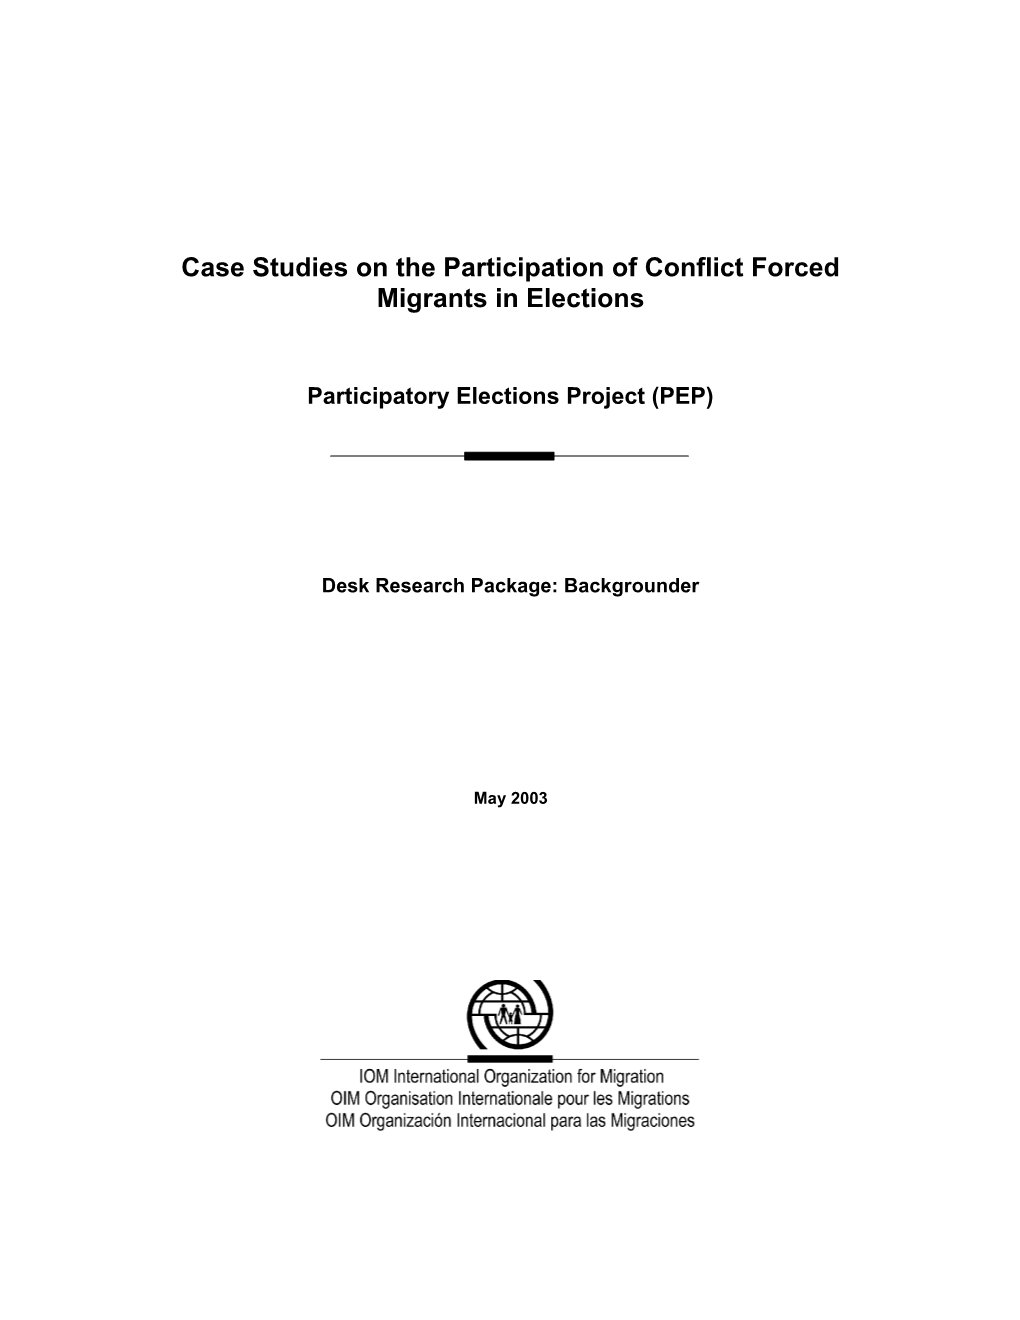 Case Studies on the Participation of Conflict Forced Migrants in Elections